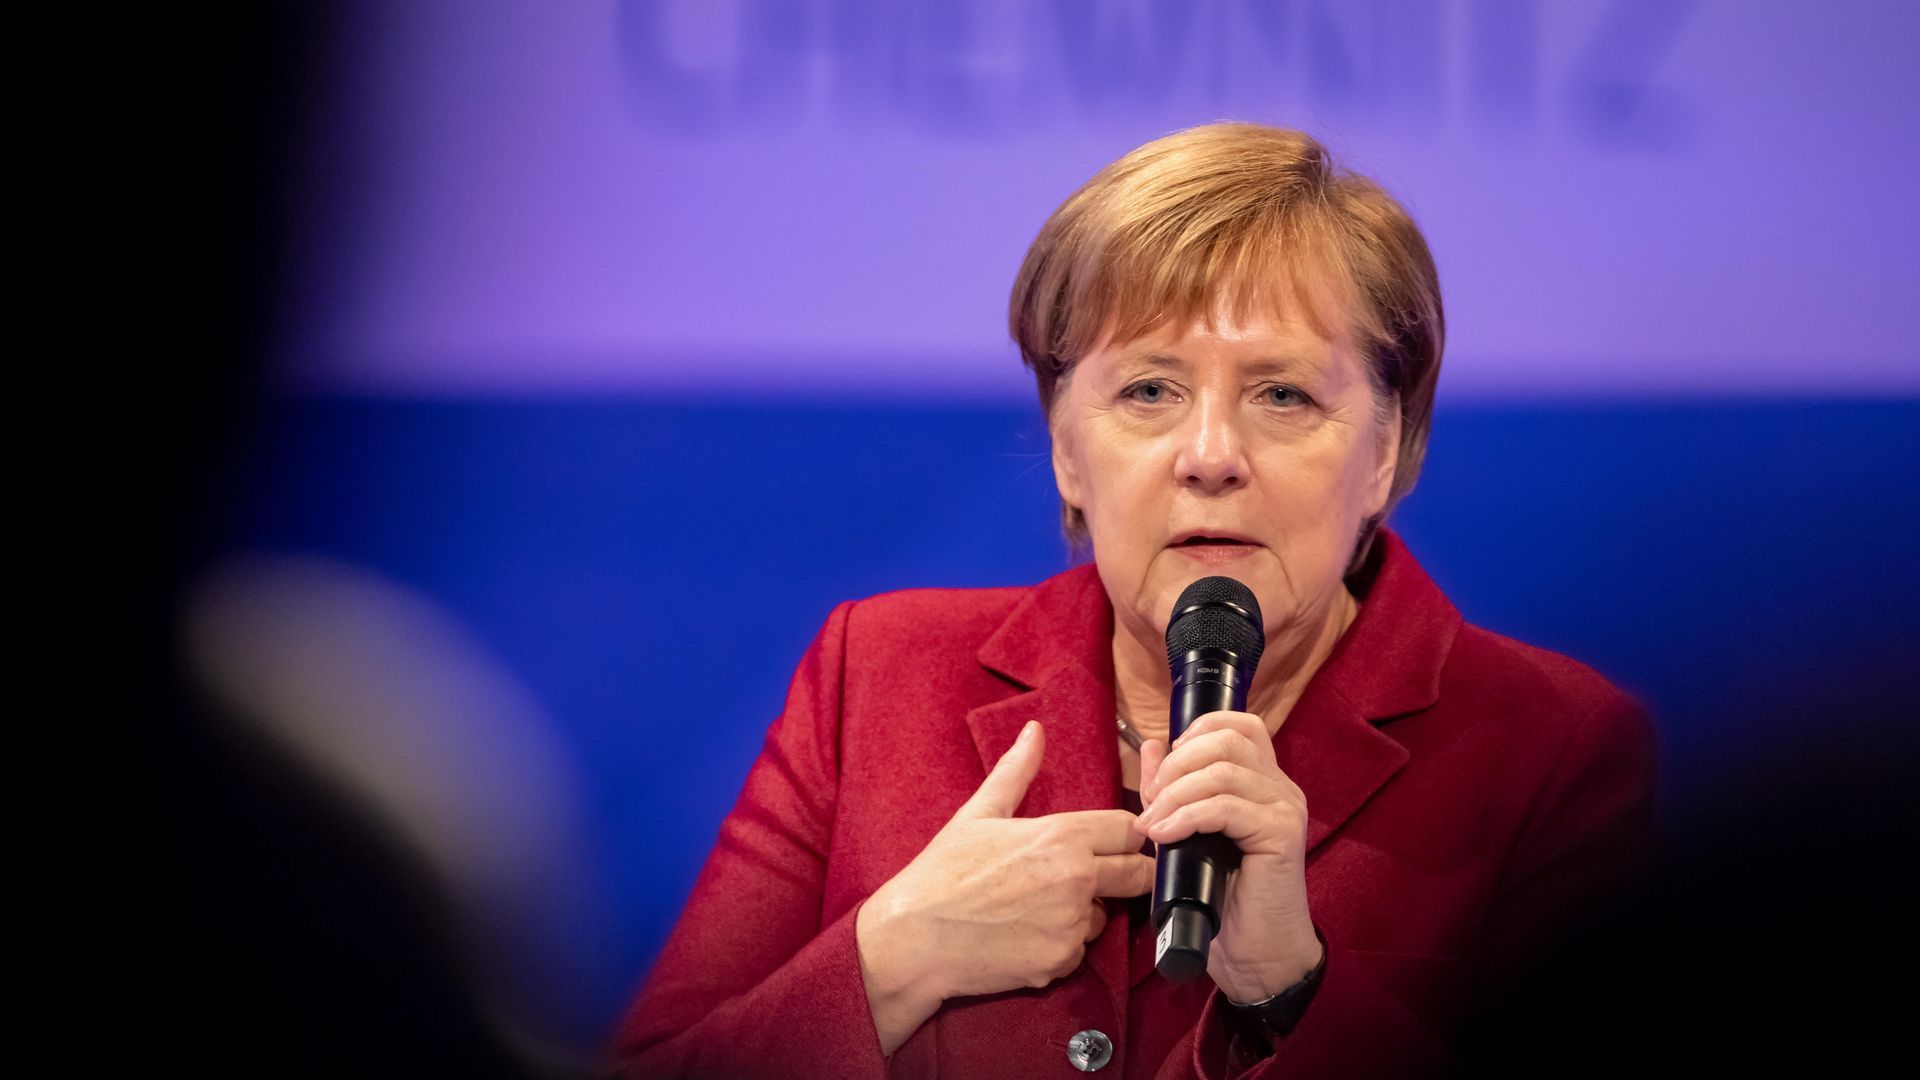 Angela Merkel speaks to an audience with a microphone